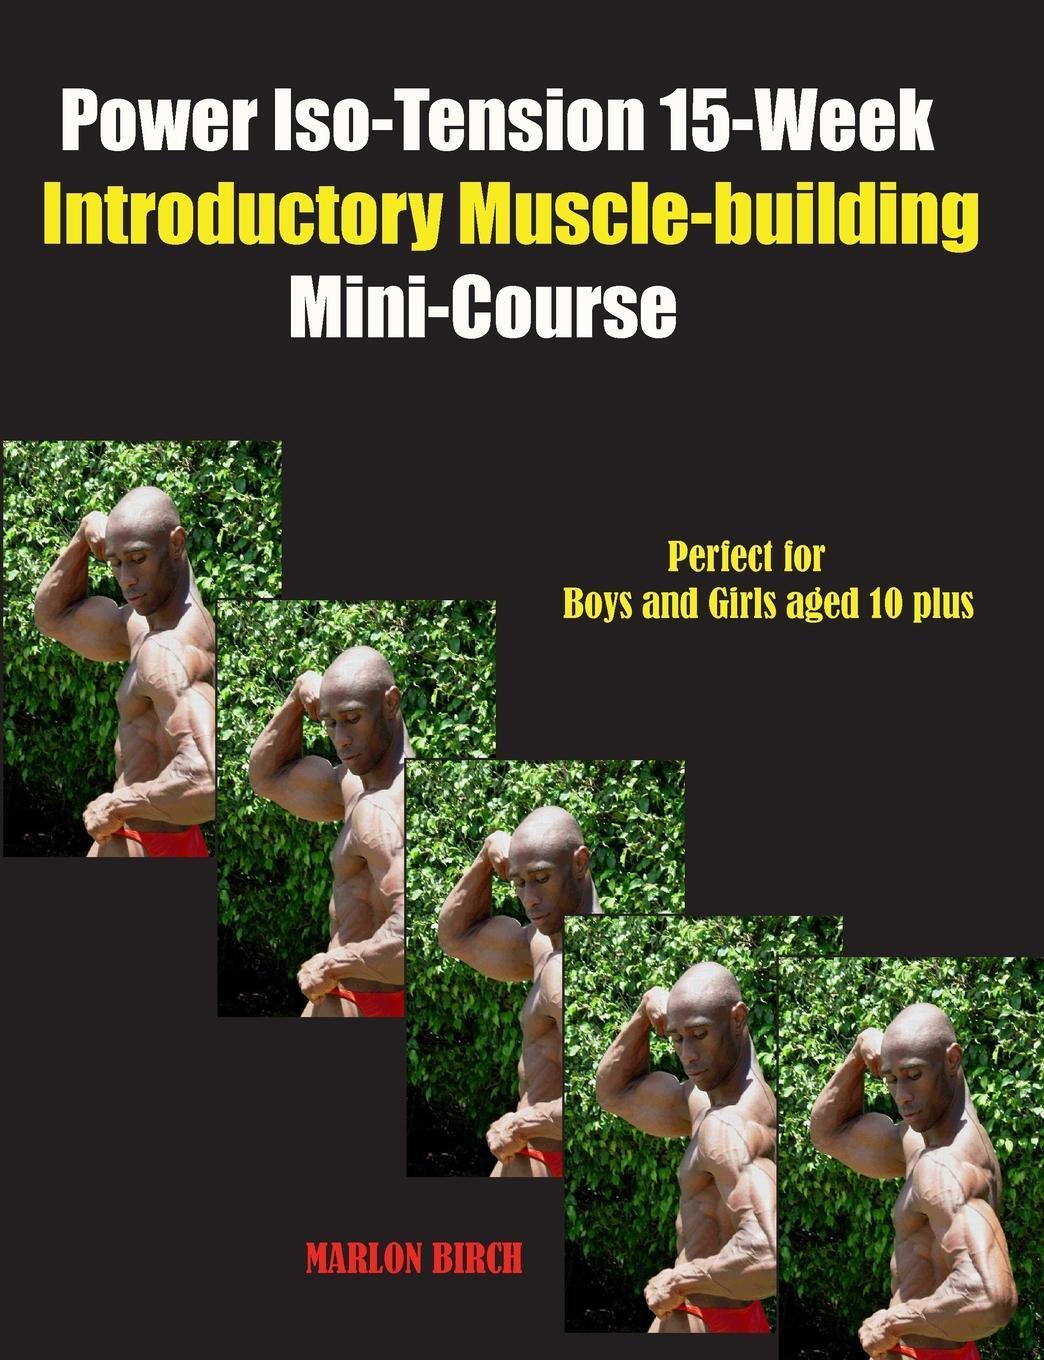 Cover: 9781990089671 | Power Iso-Tension 15 Week Muscle-building introductory Mini-Course